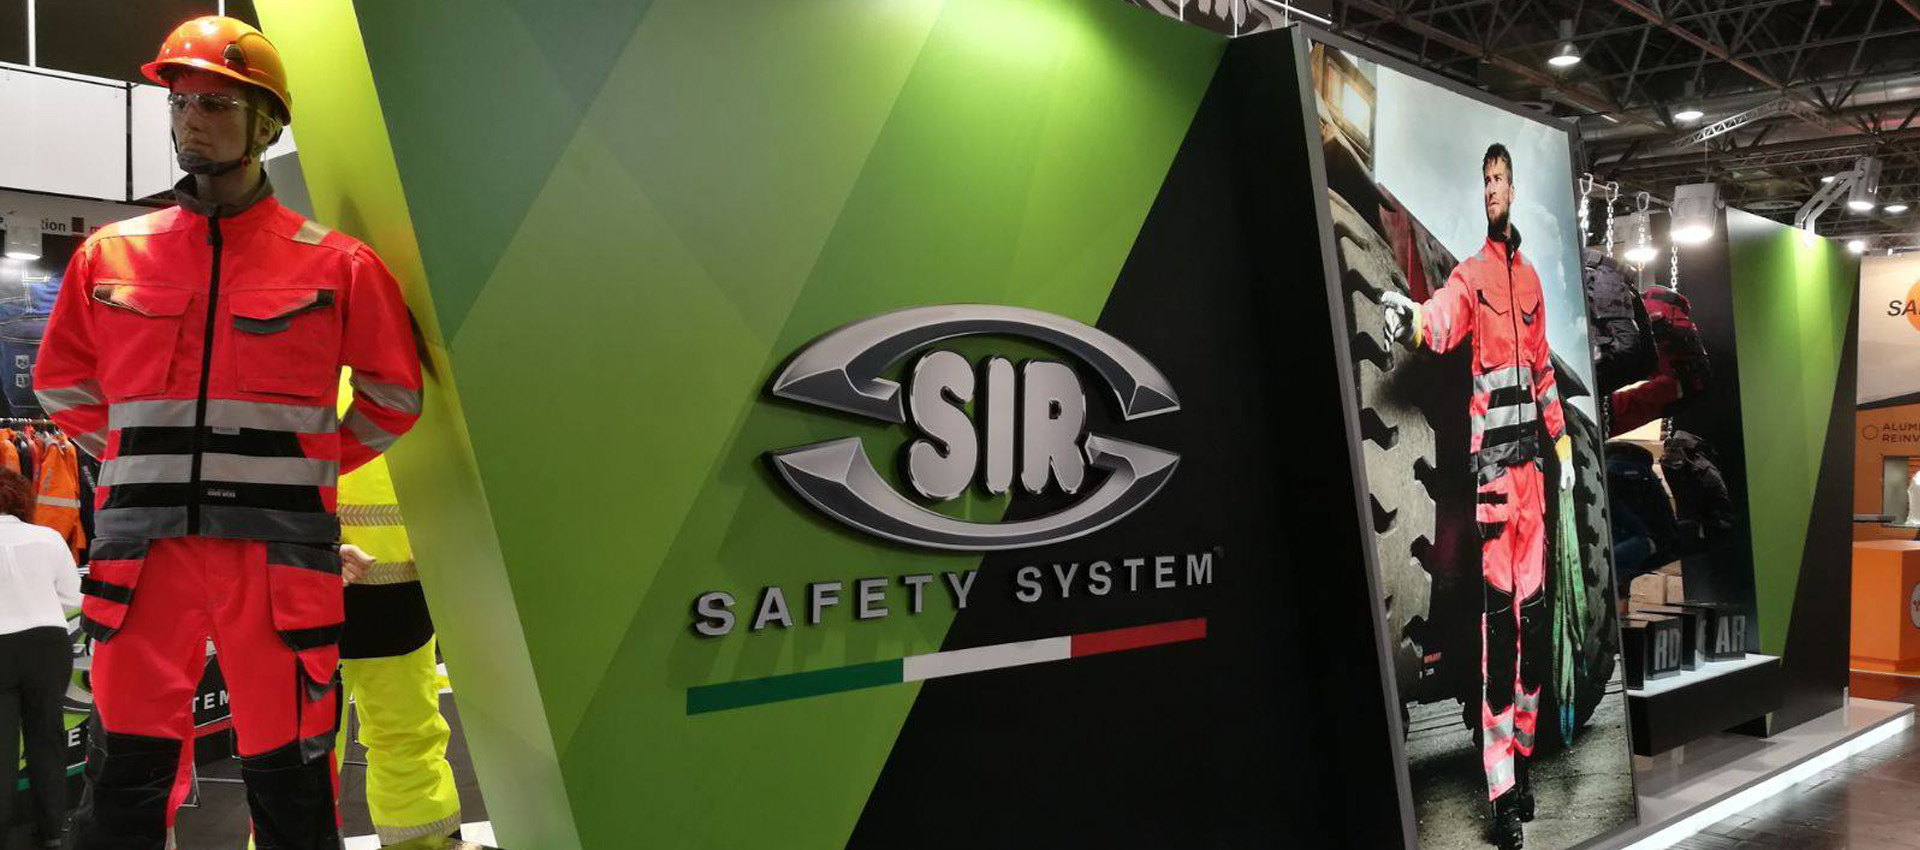 Sir Safety System will be attending Expoprotection in Paris